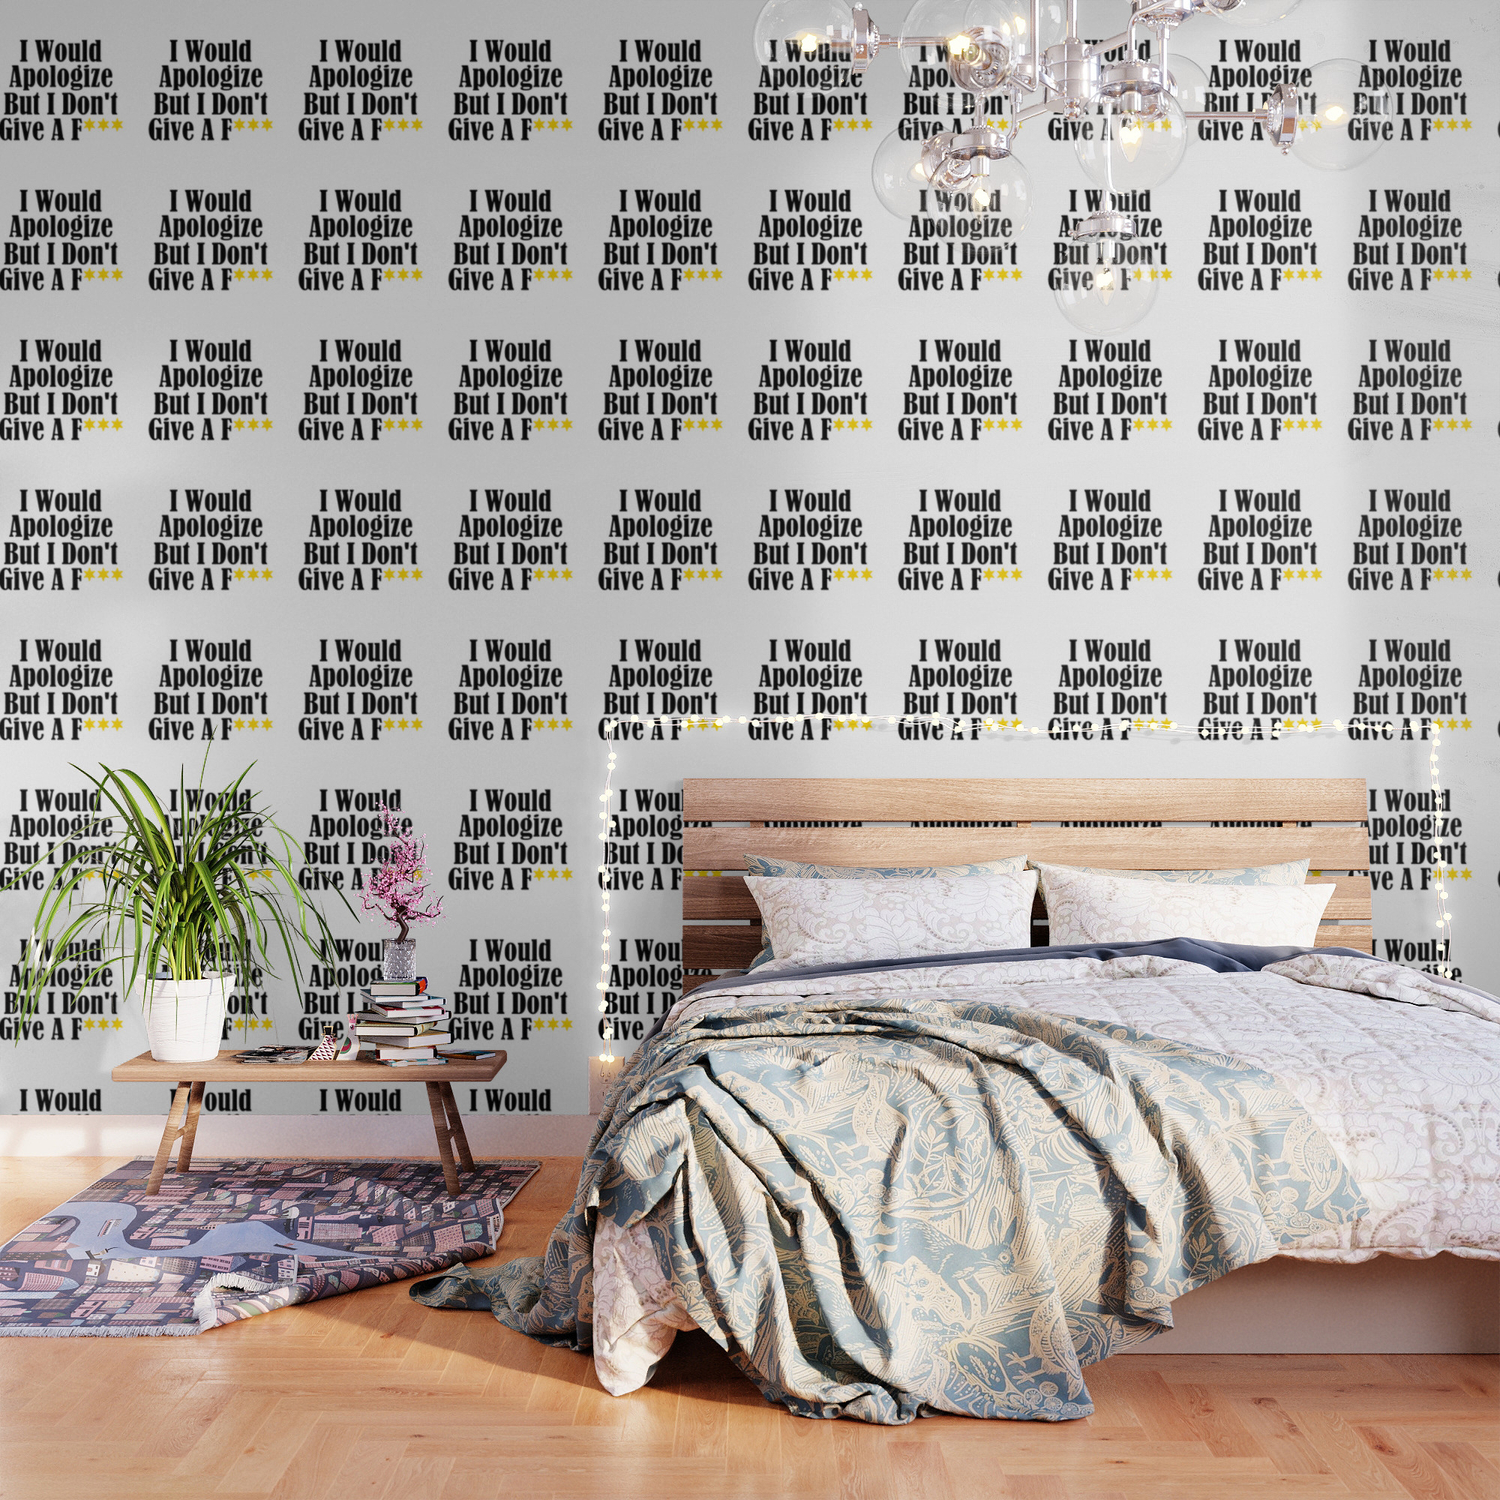 Funny Whatever Apologize Don't Care Give A Crap Meme Wallpaper by  Art-iculate | Society6